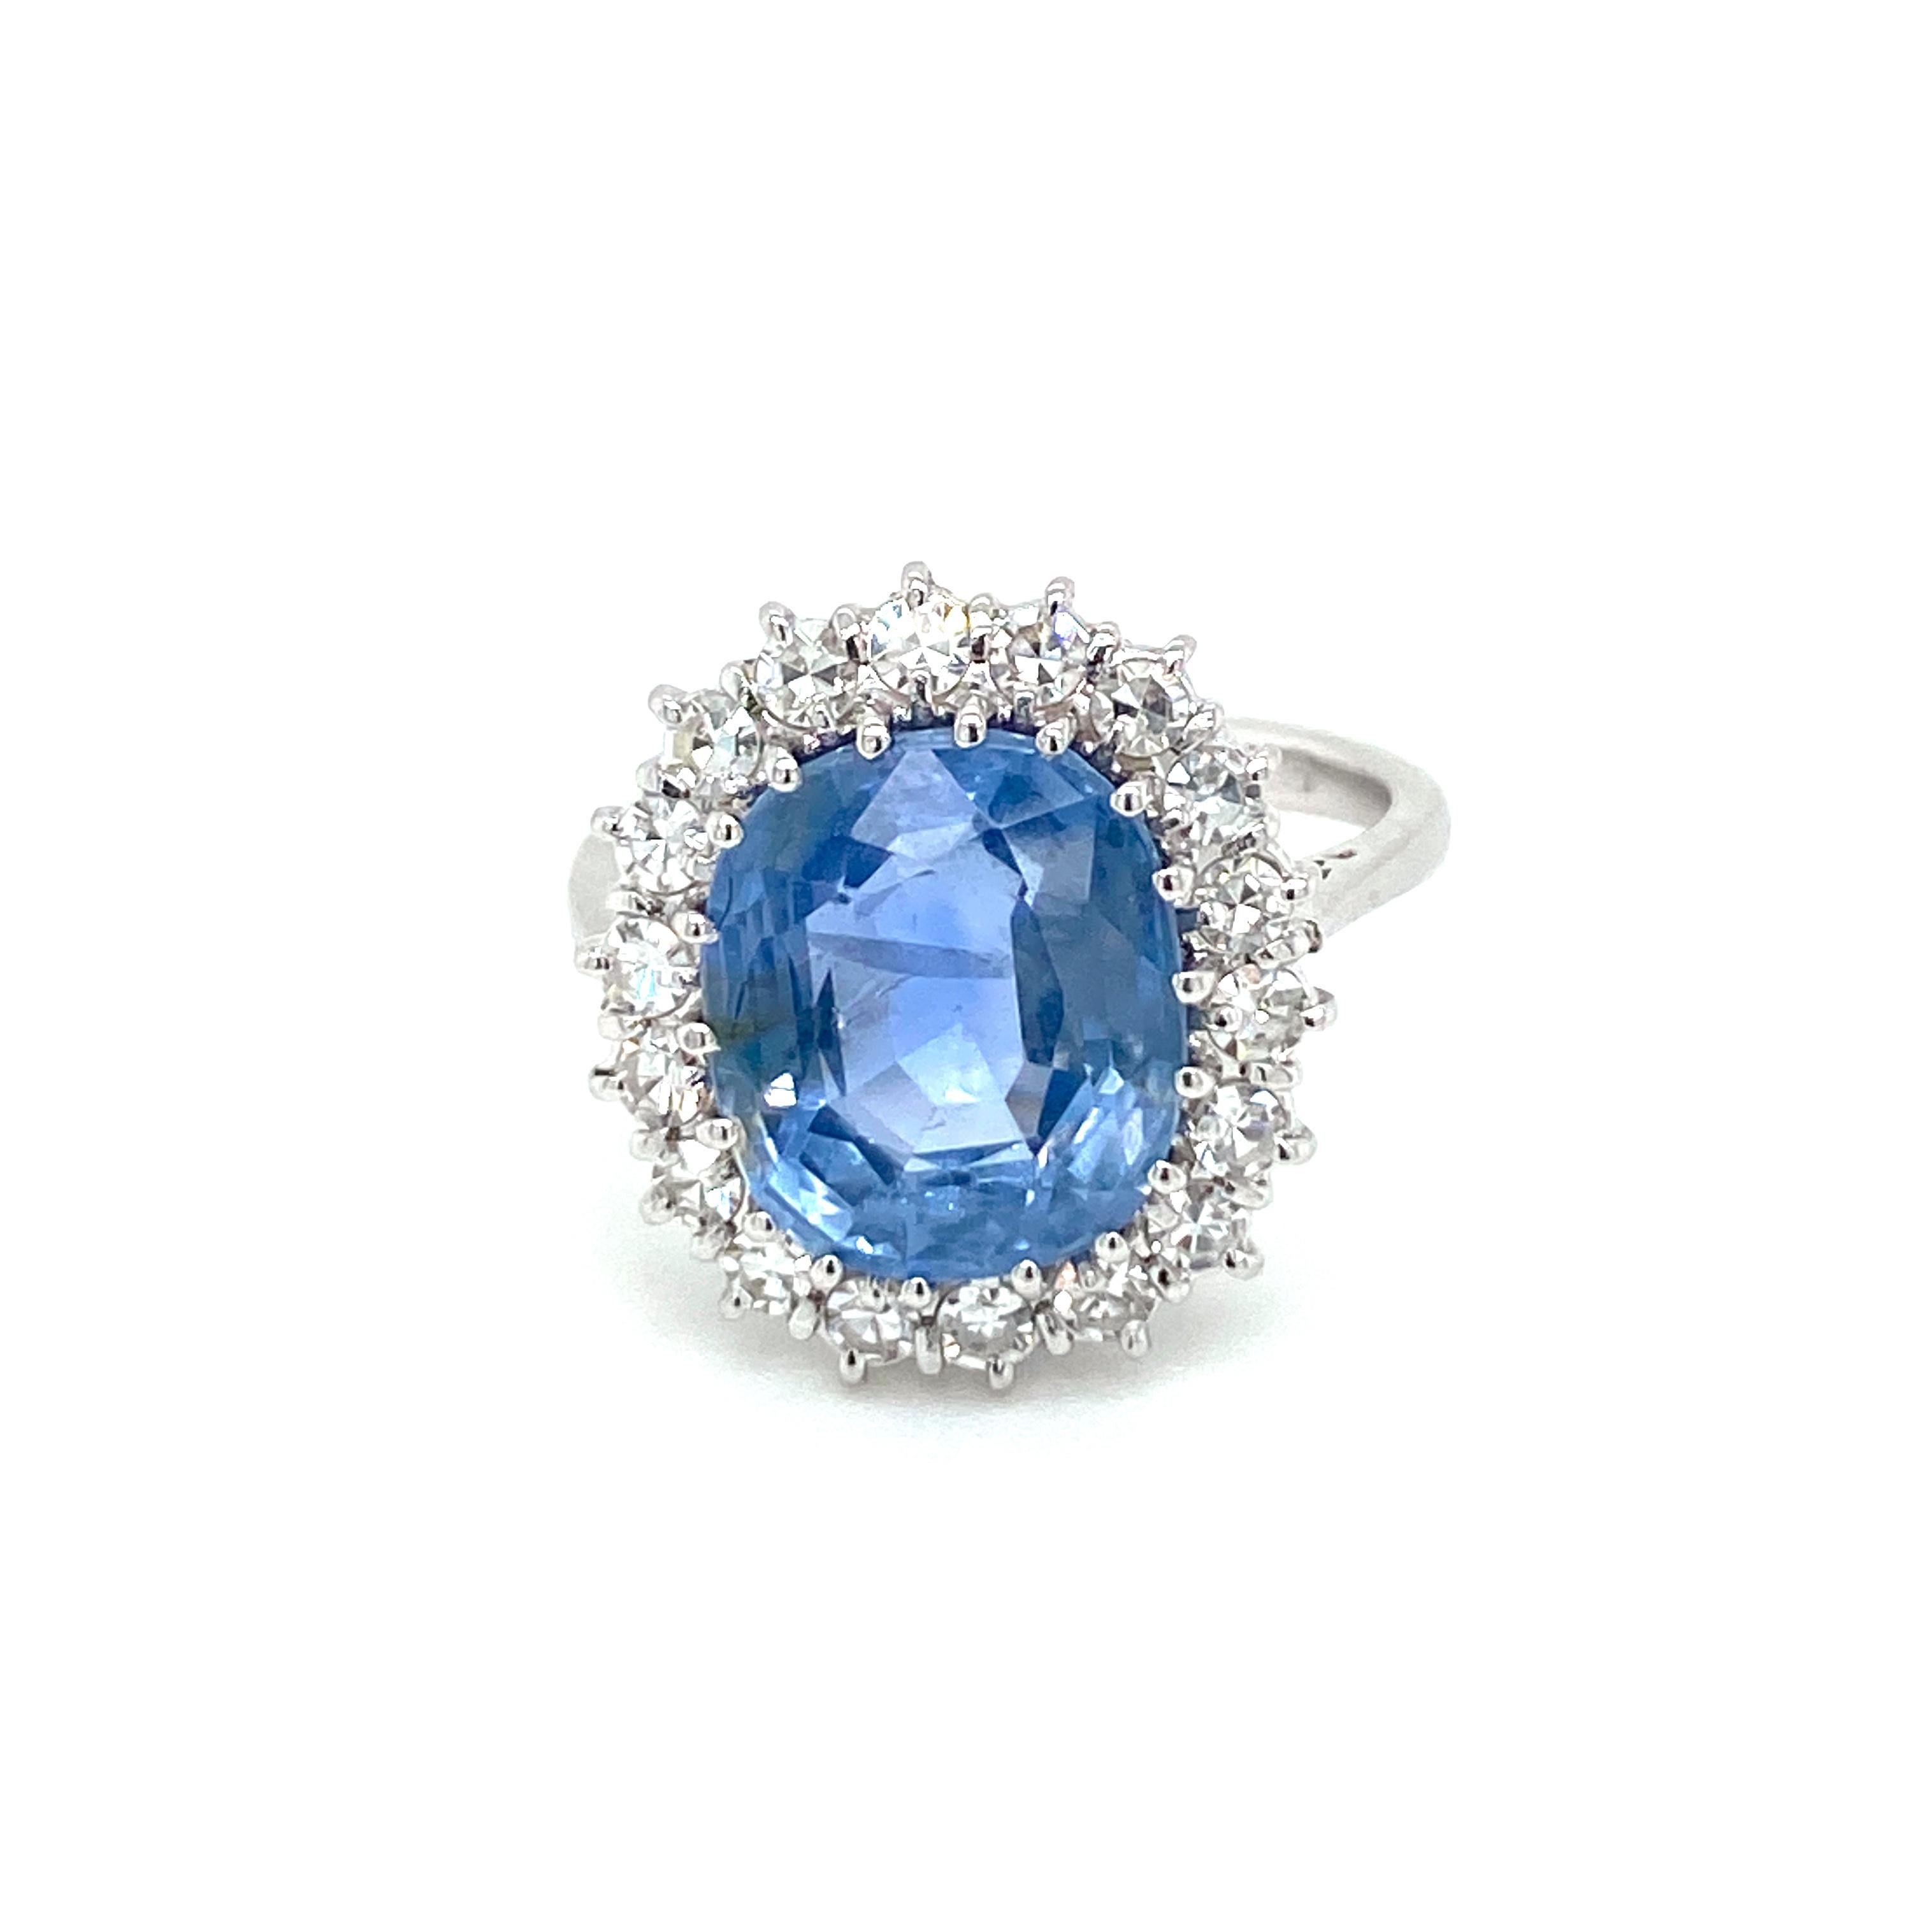 Beautiful ring set with an oval mixed cut Natural Unheated Ceylon Sapphire, weighing. 6.48 carats, surrounded by sparkling old mine-cut diamonds, weighing all together 0.70 cts. and graded G Color Vvs clarity.

Handcrafted in 18k white gold, origin